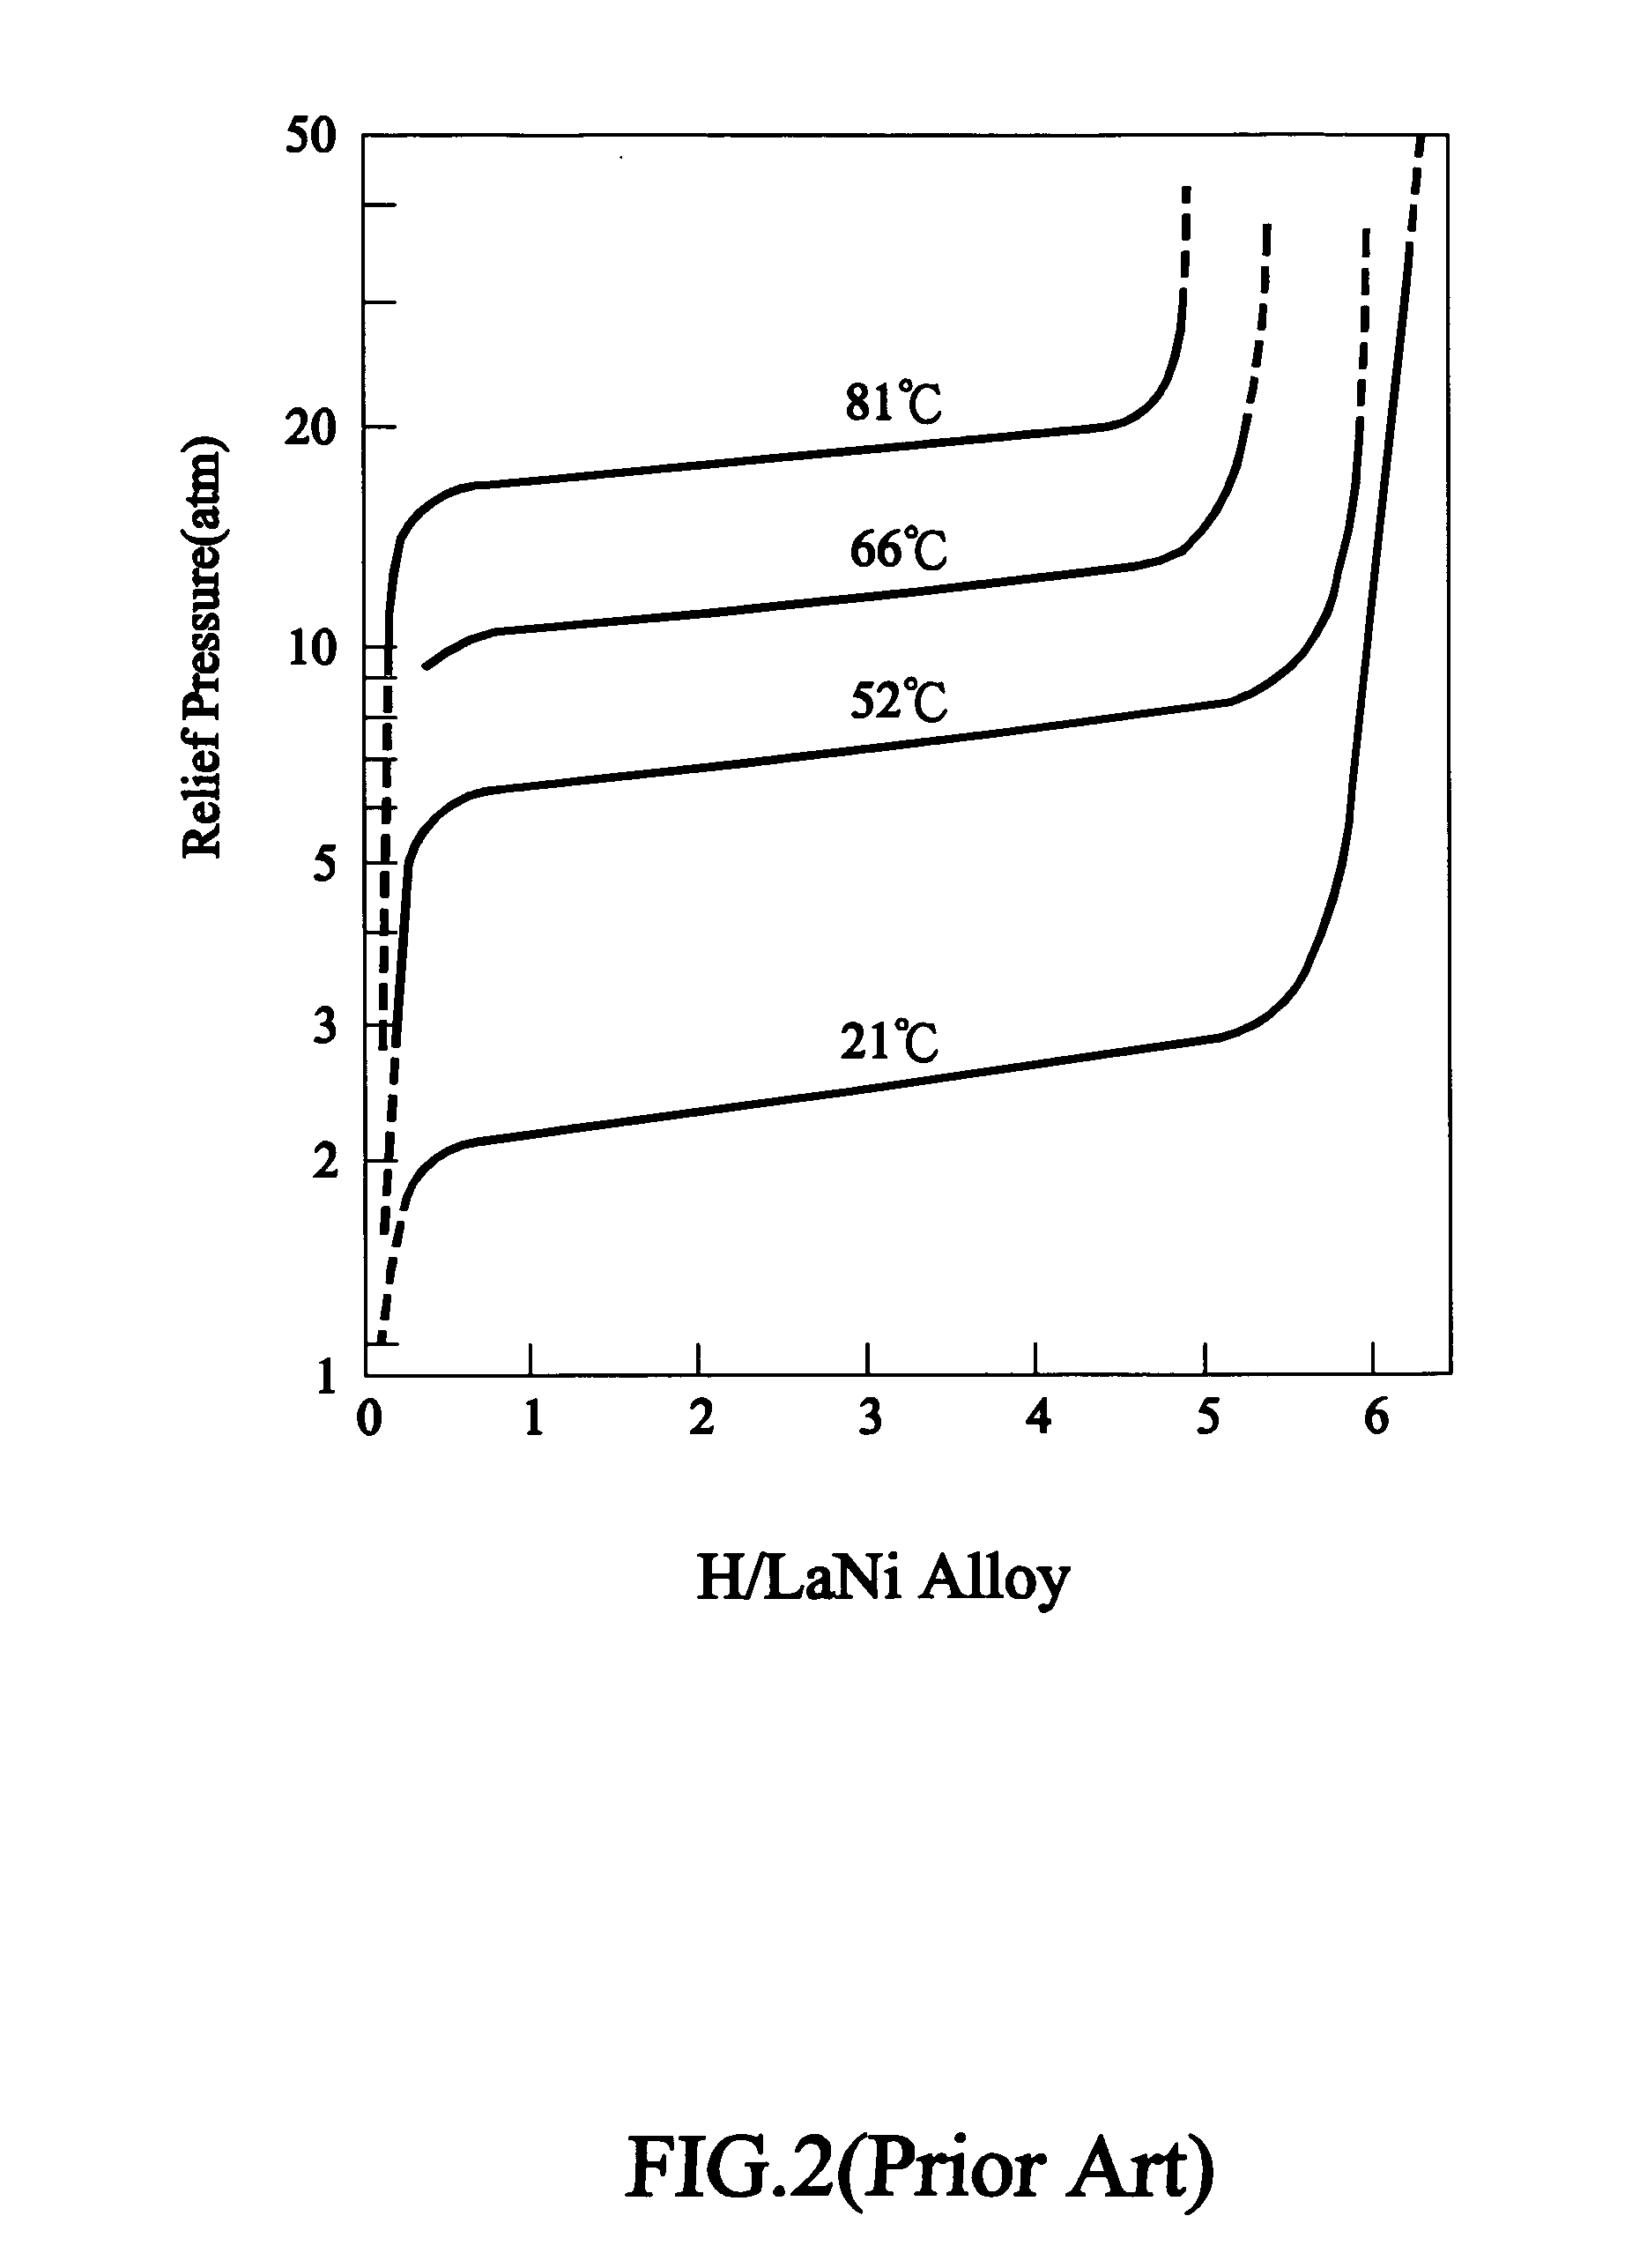 Method for measuring remaining hydrogen capacity of hydrogen storage canister